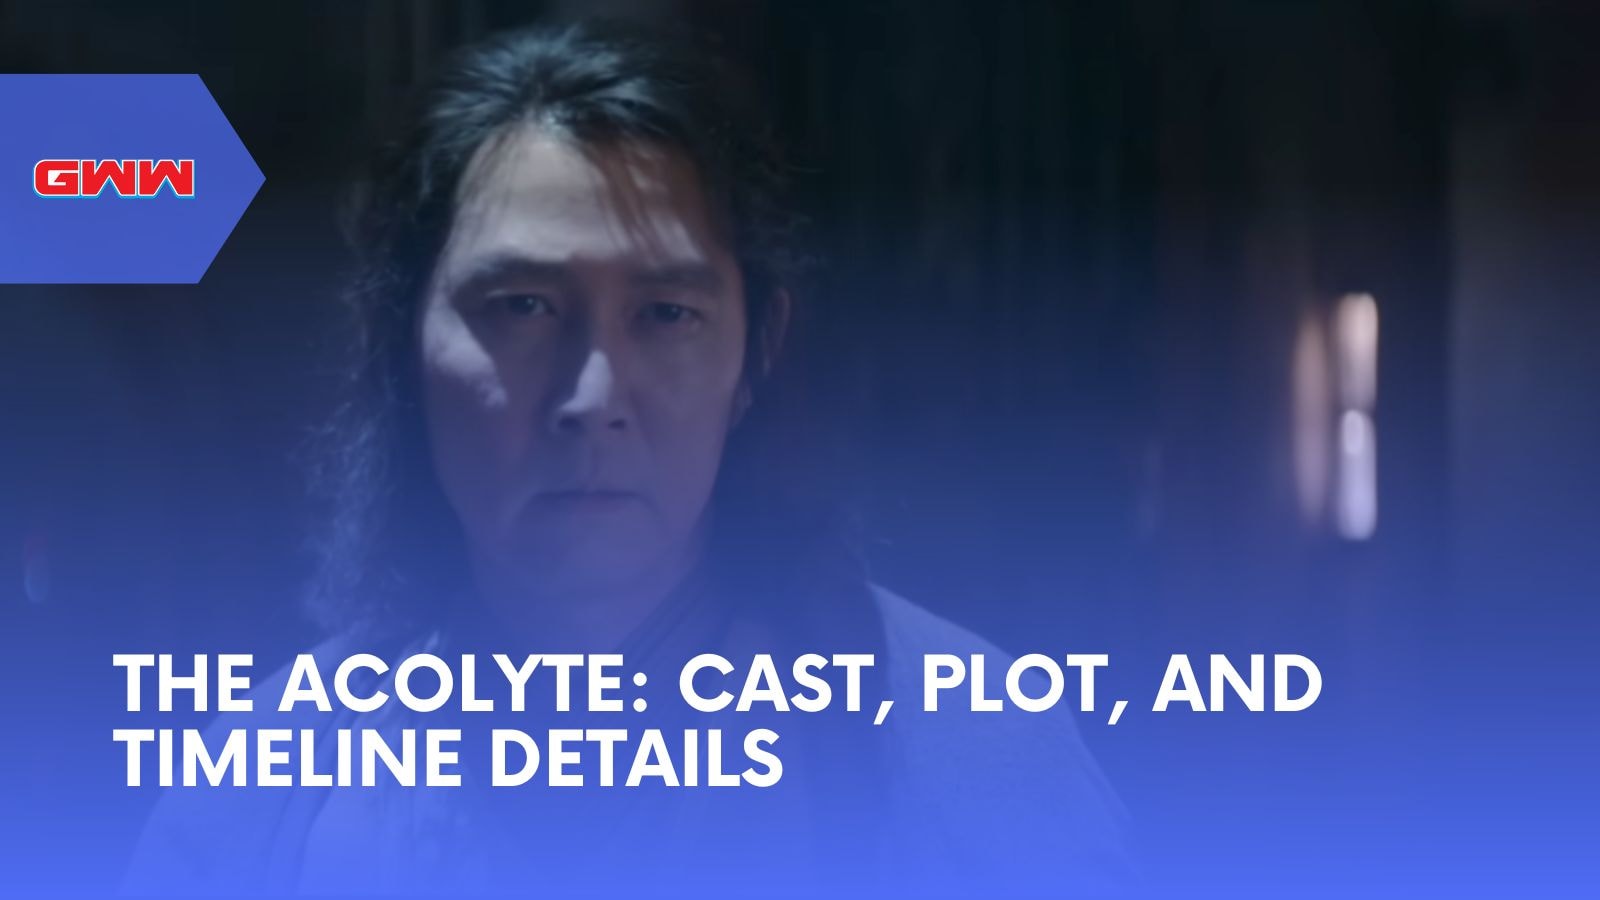 The Acolyte: Cast, Plot, and Timeline Details